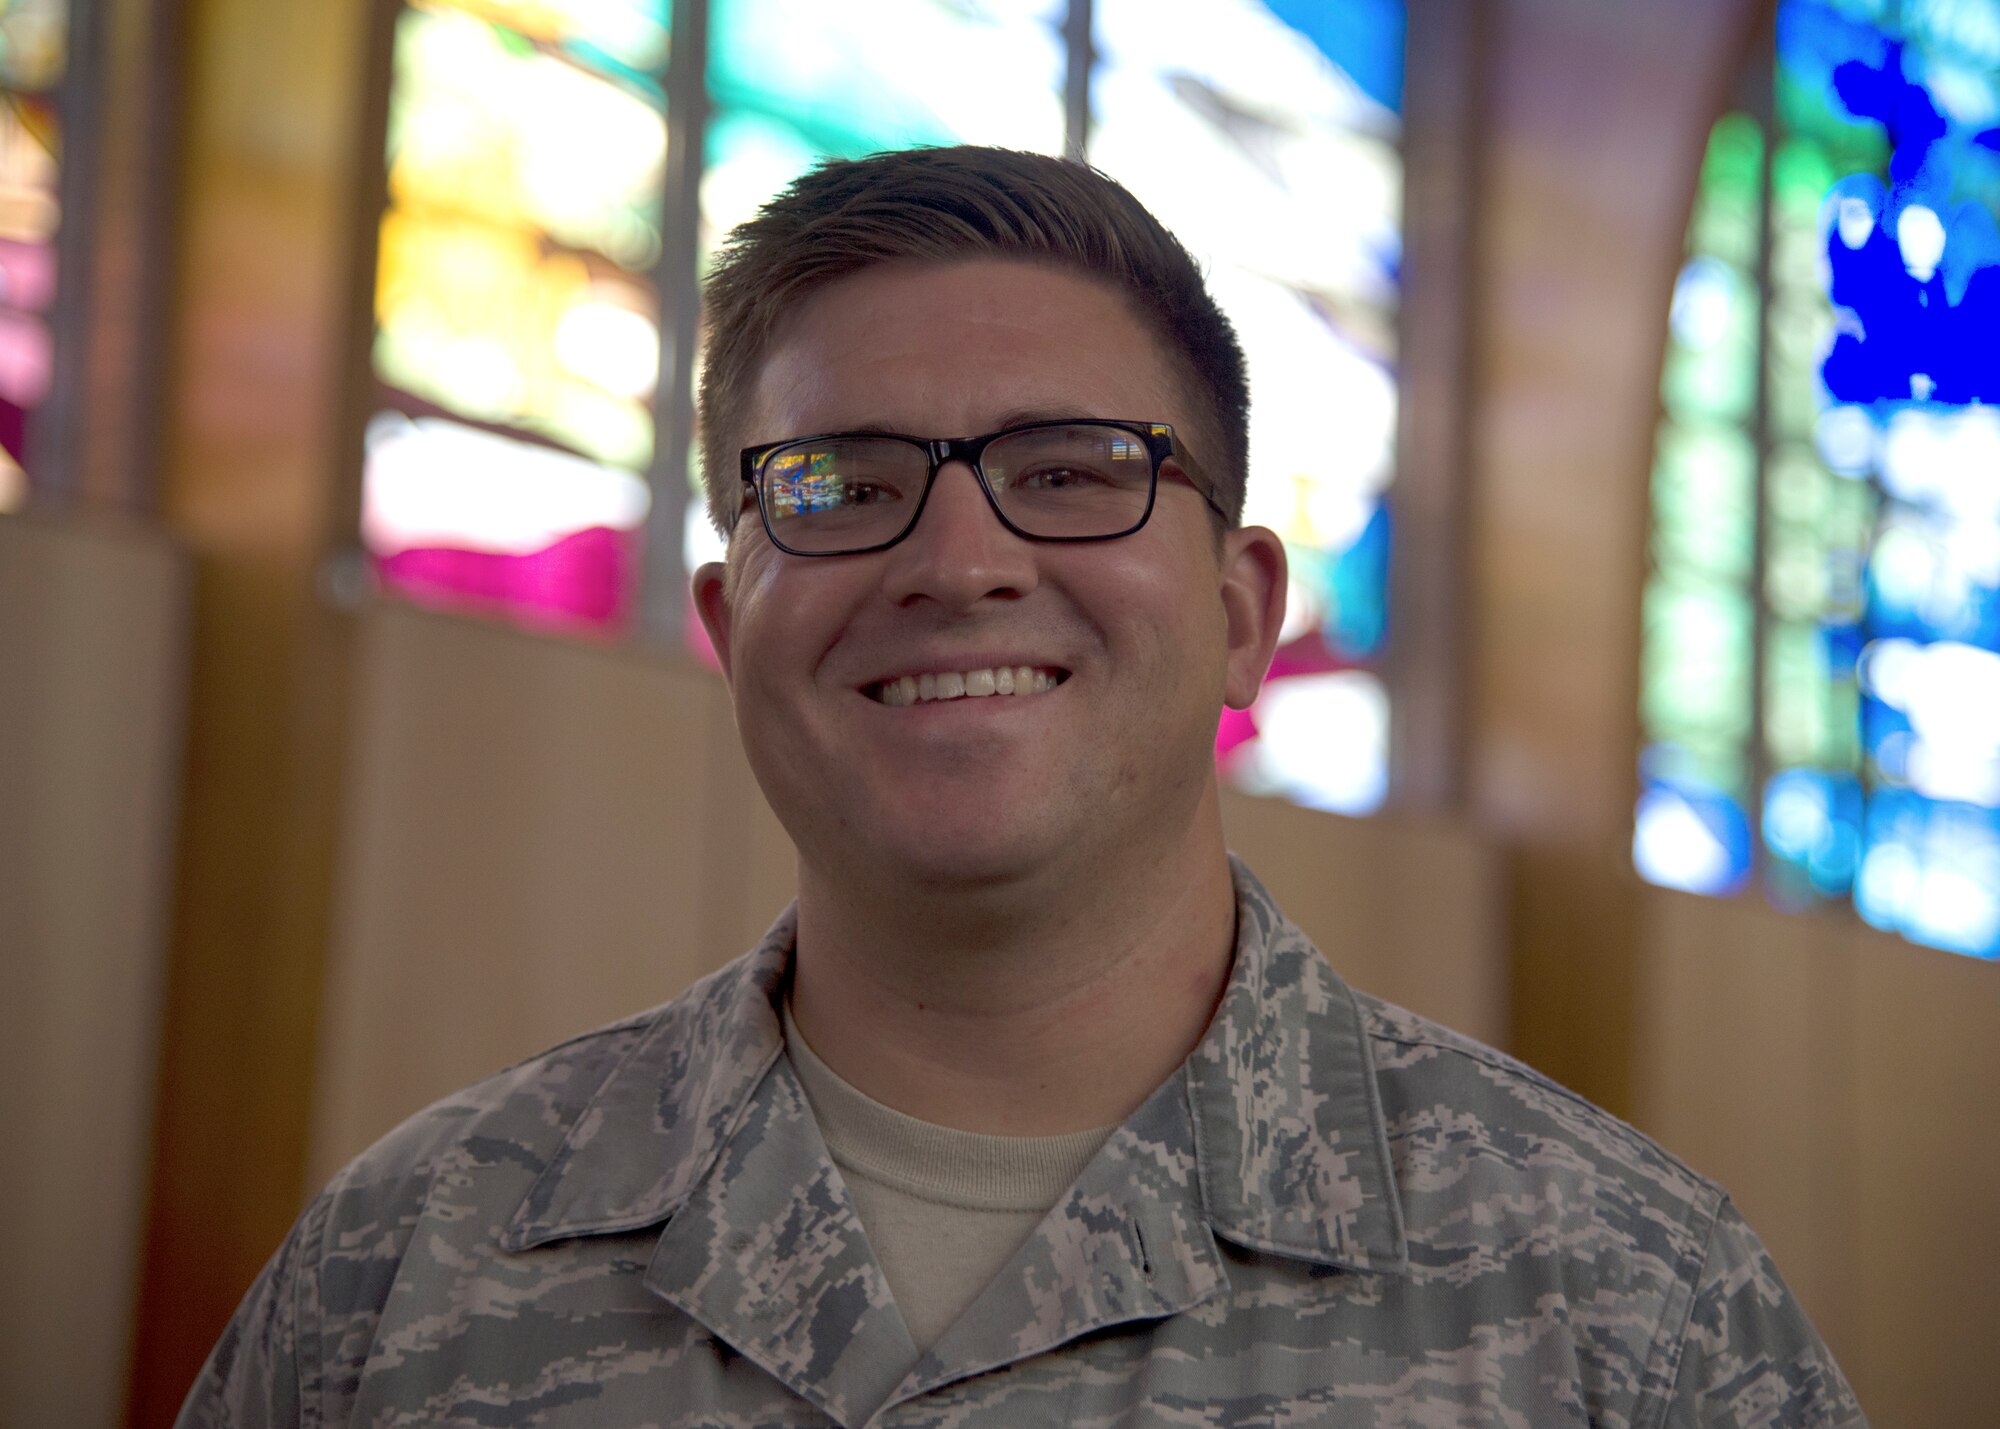 Staff Sgt. Colin Owens, 49th Wing Chapel religious affairs Airman, poses for a photo inside the base chapel Sept. 17 on Holloman Air Force Base, N.M. After cross-training from air traffic control to religious affairs, Owens arrived at Holloman in November 2017, to begin his new career. (U.S. Air Force photo by Airman 1st Class Kindra Stewart)